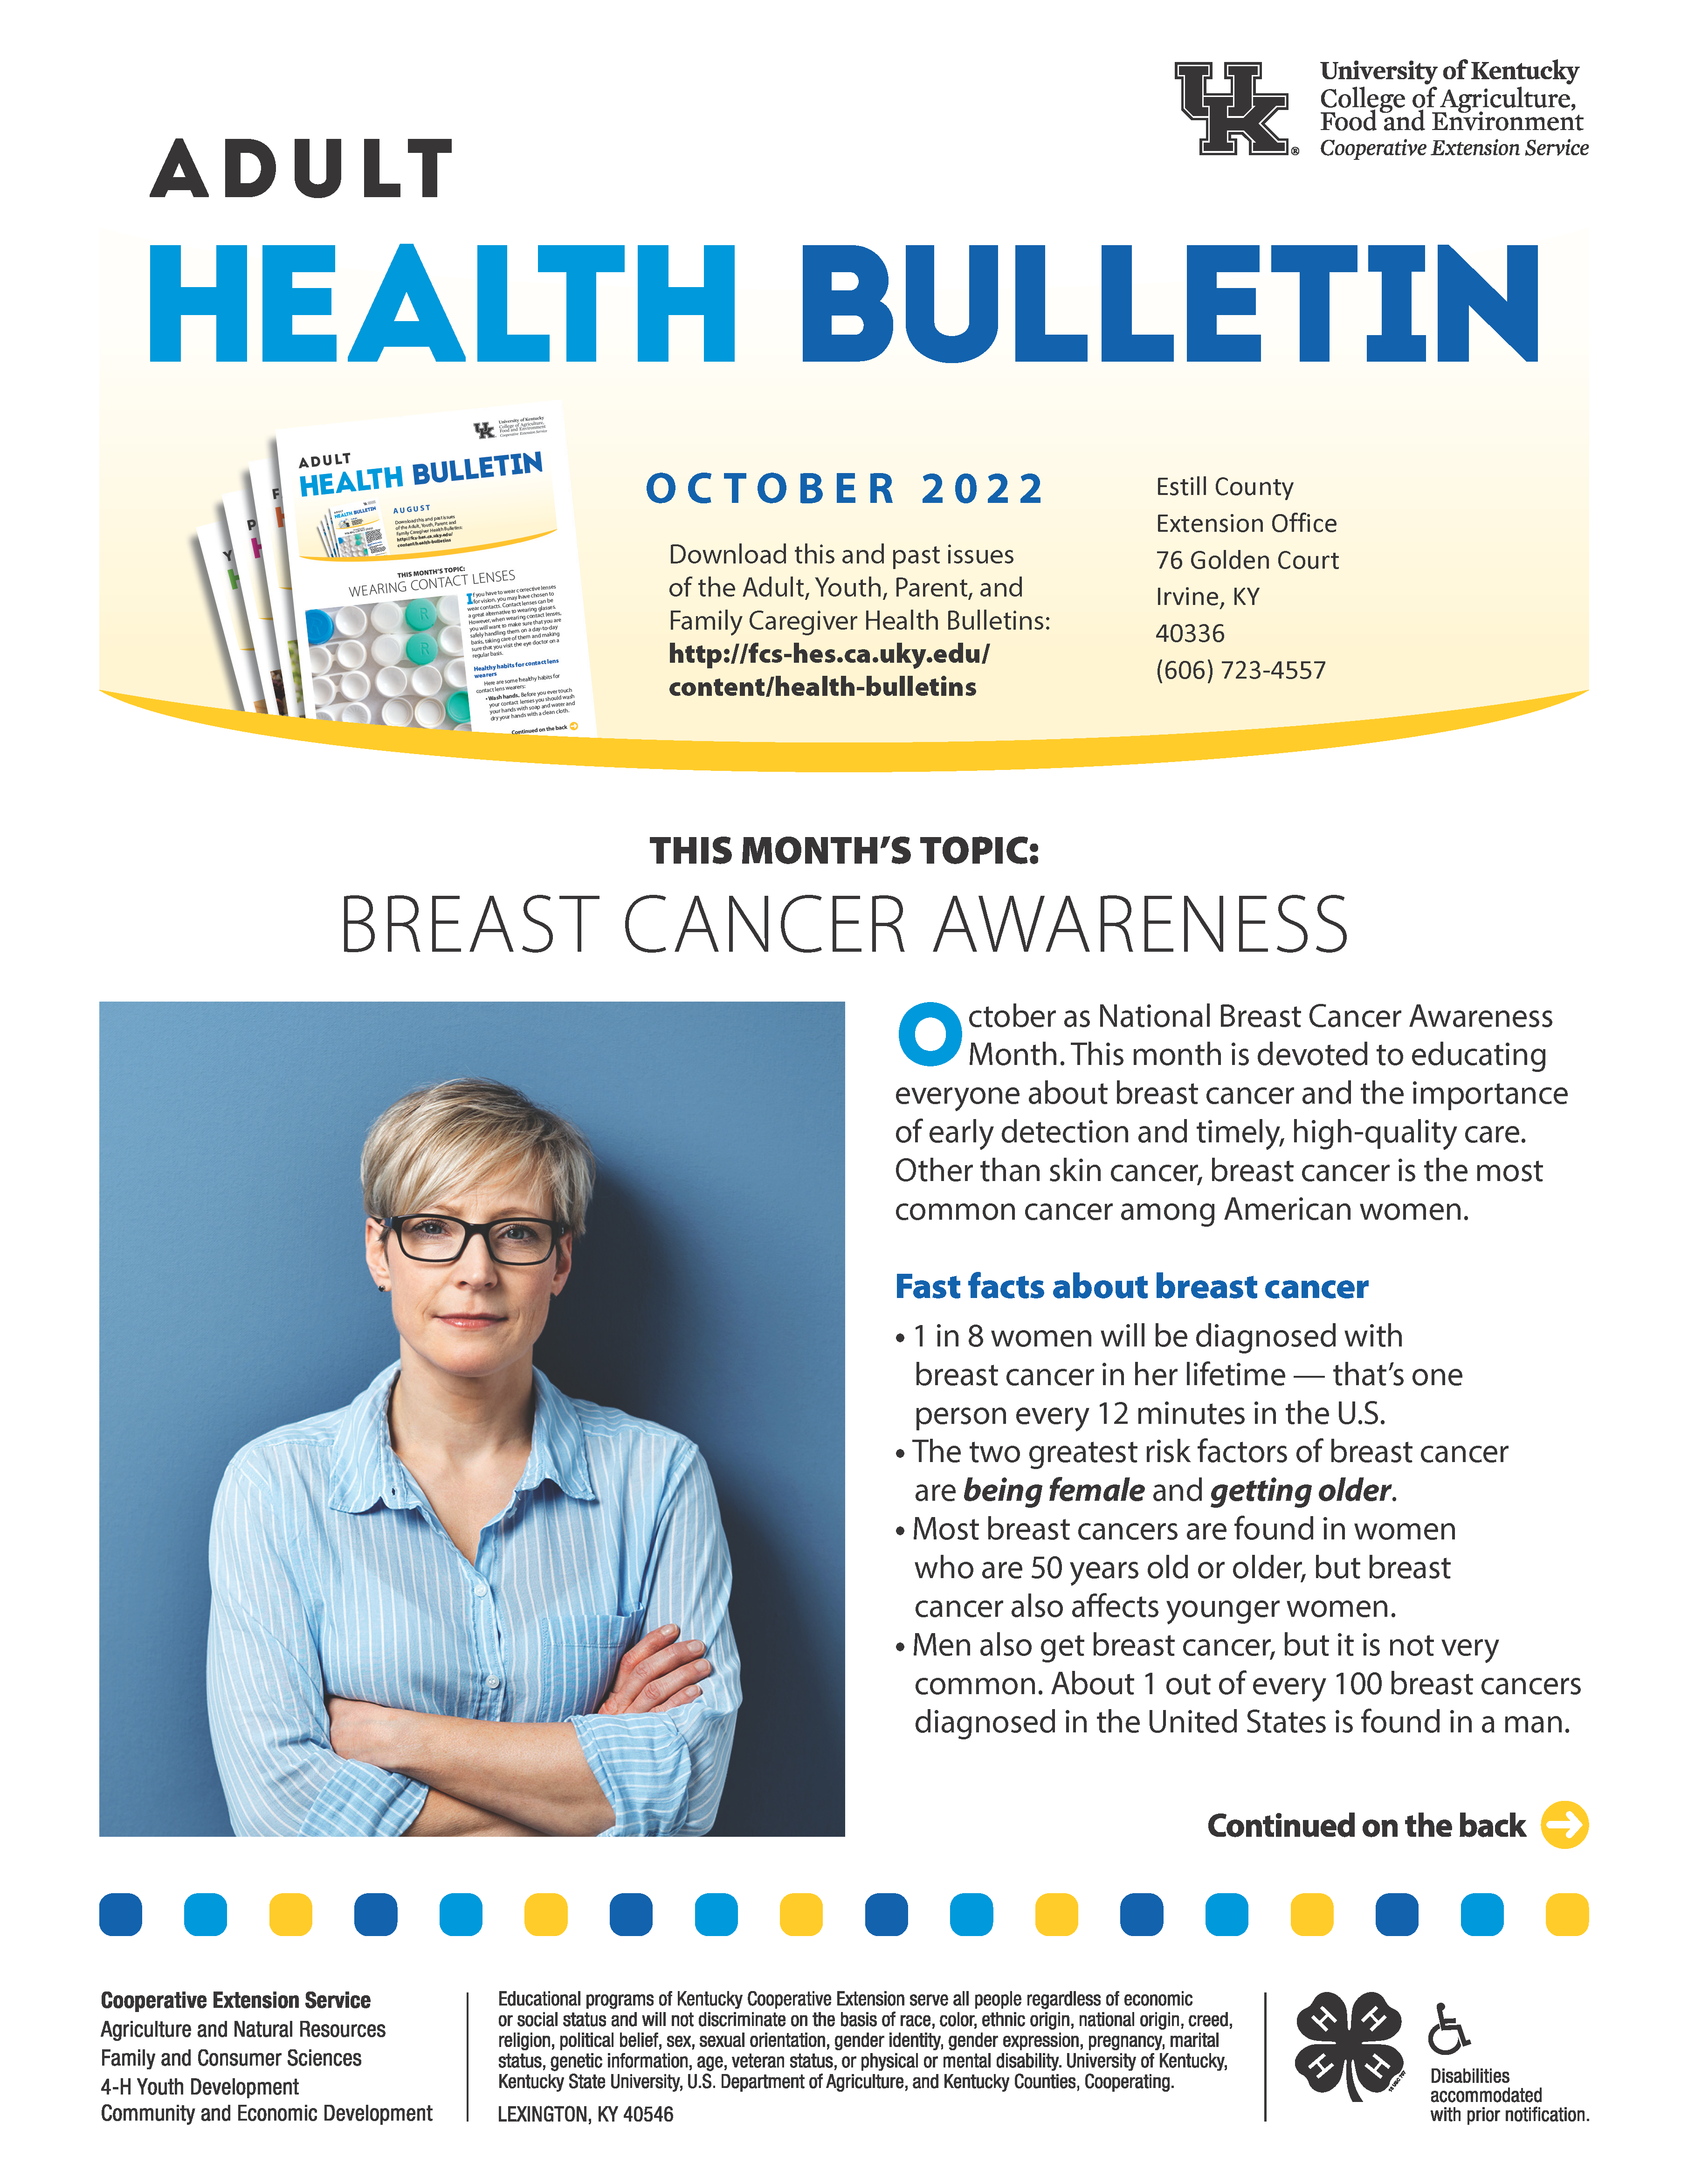 Adult Health Bulletin - Breast Cancer Awareness page 1